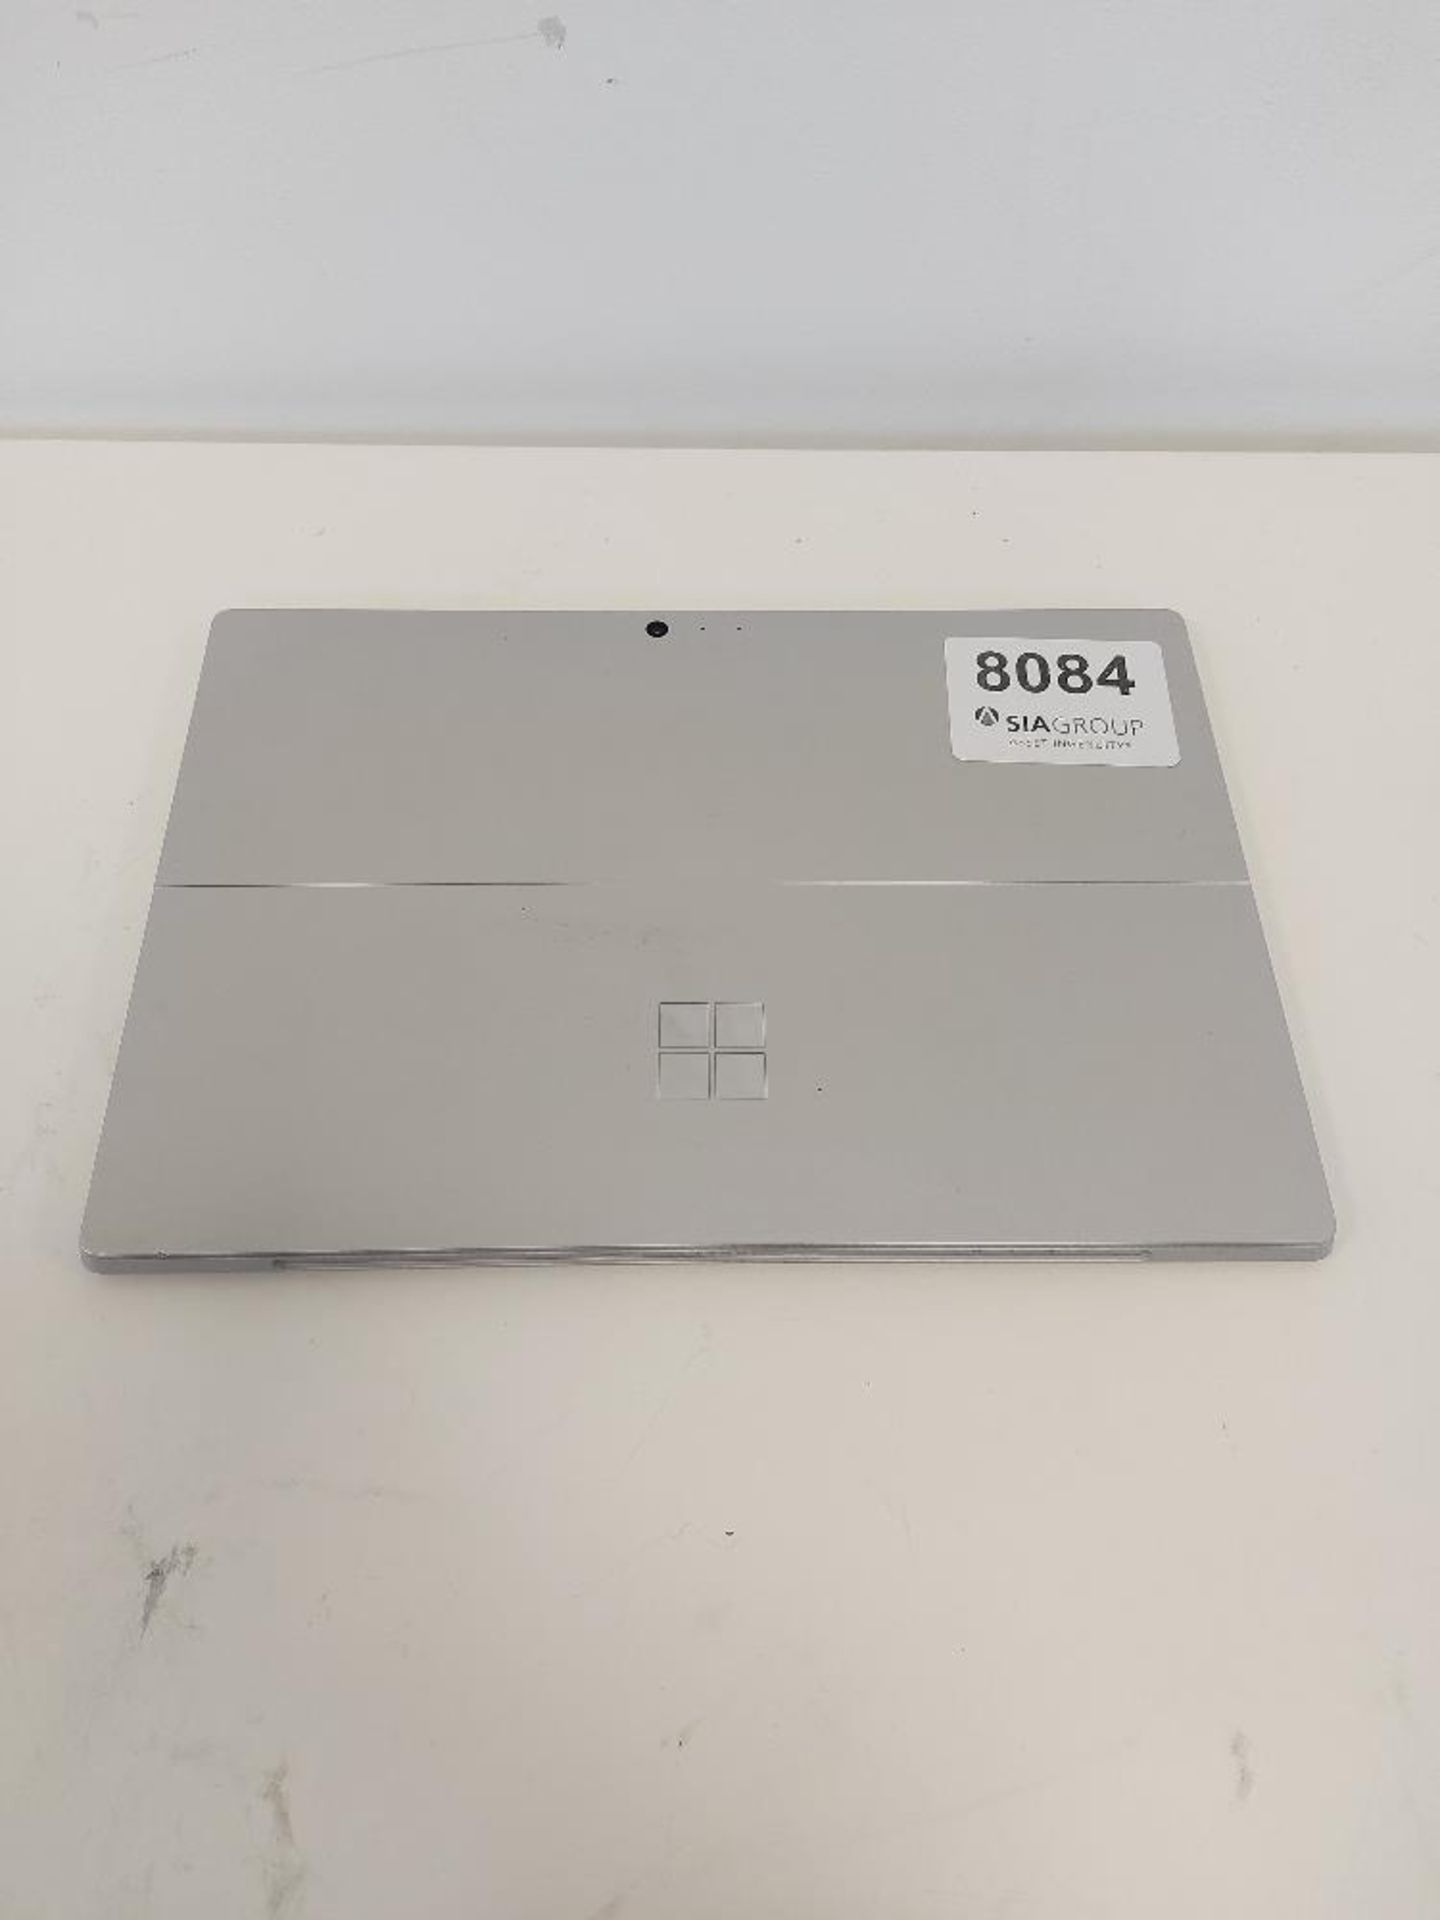 Microsoft Surface Pro 4 128GB Tablet - Image 2 of 3